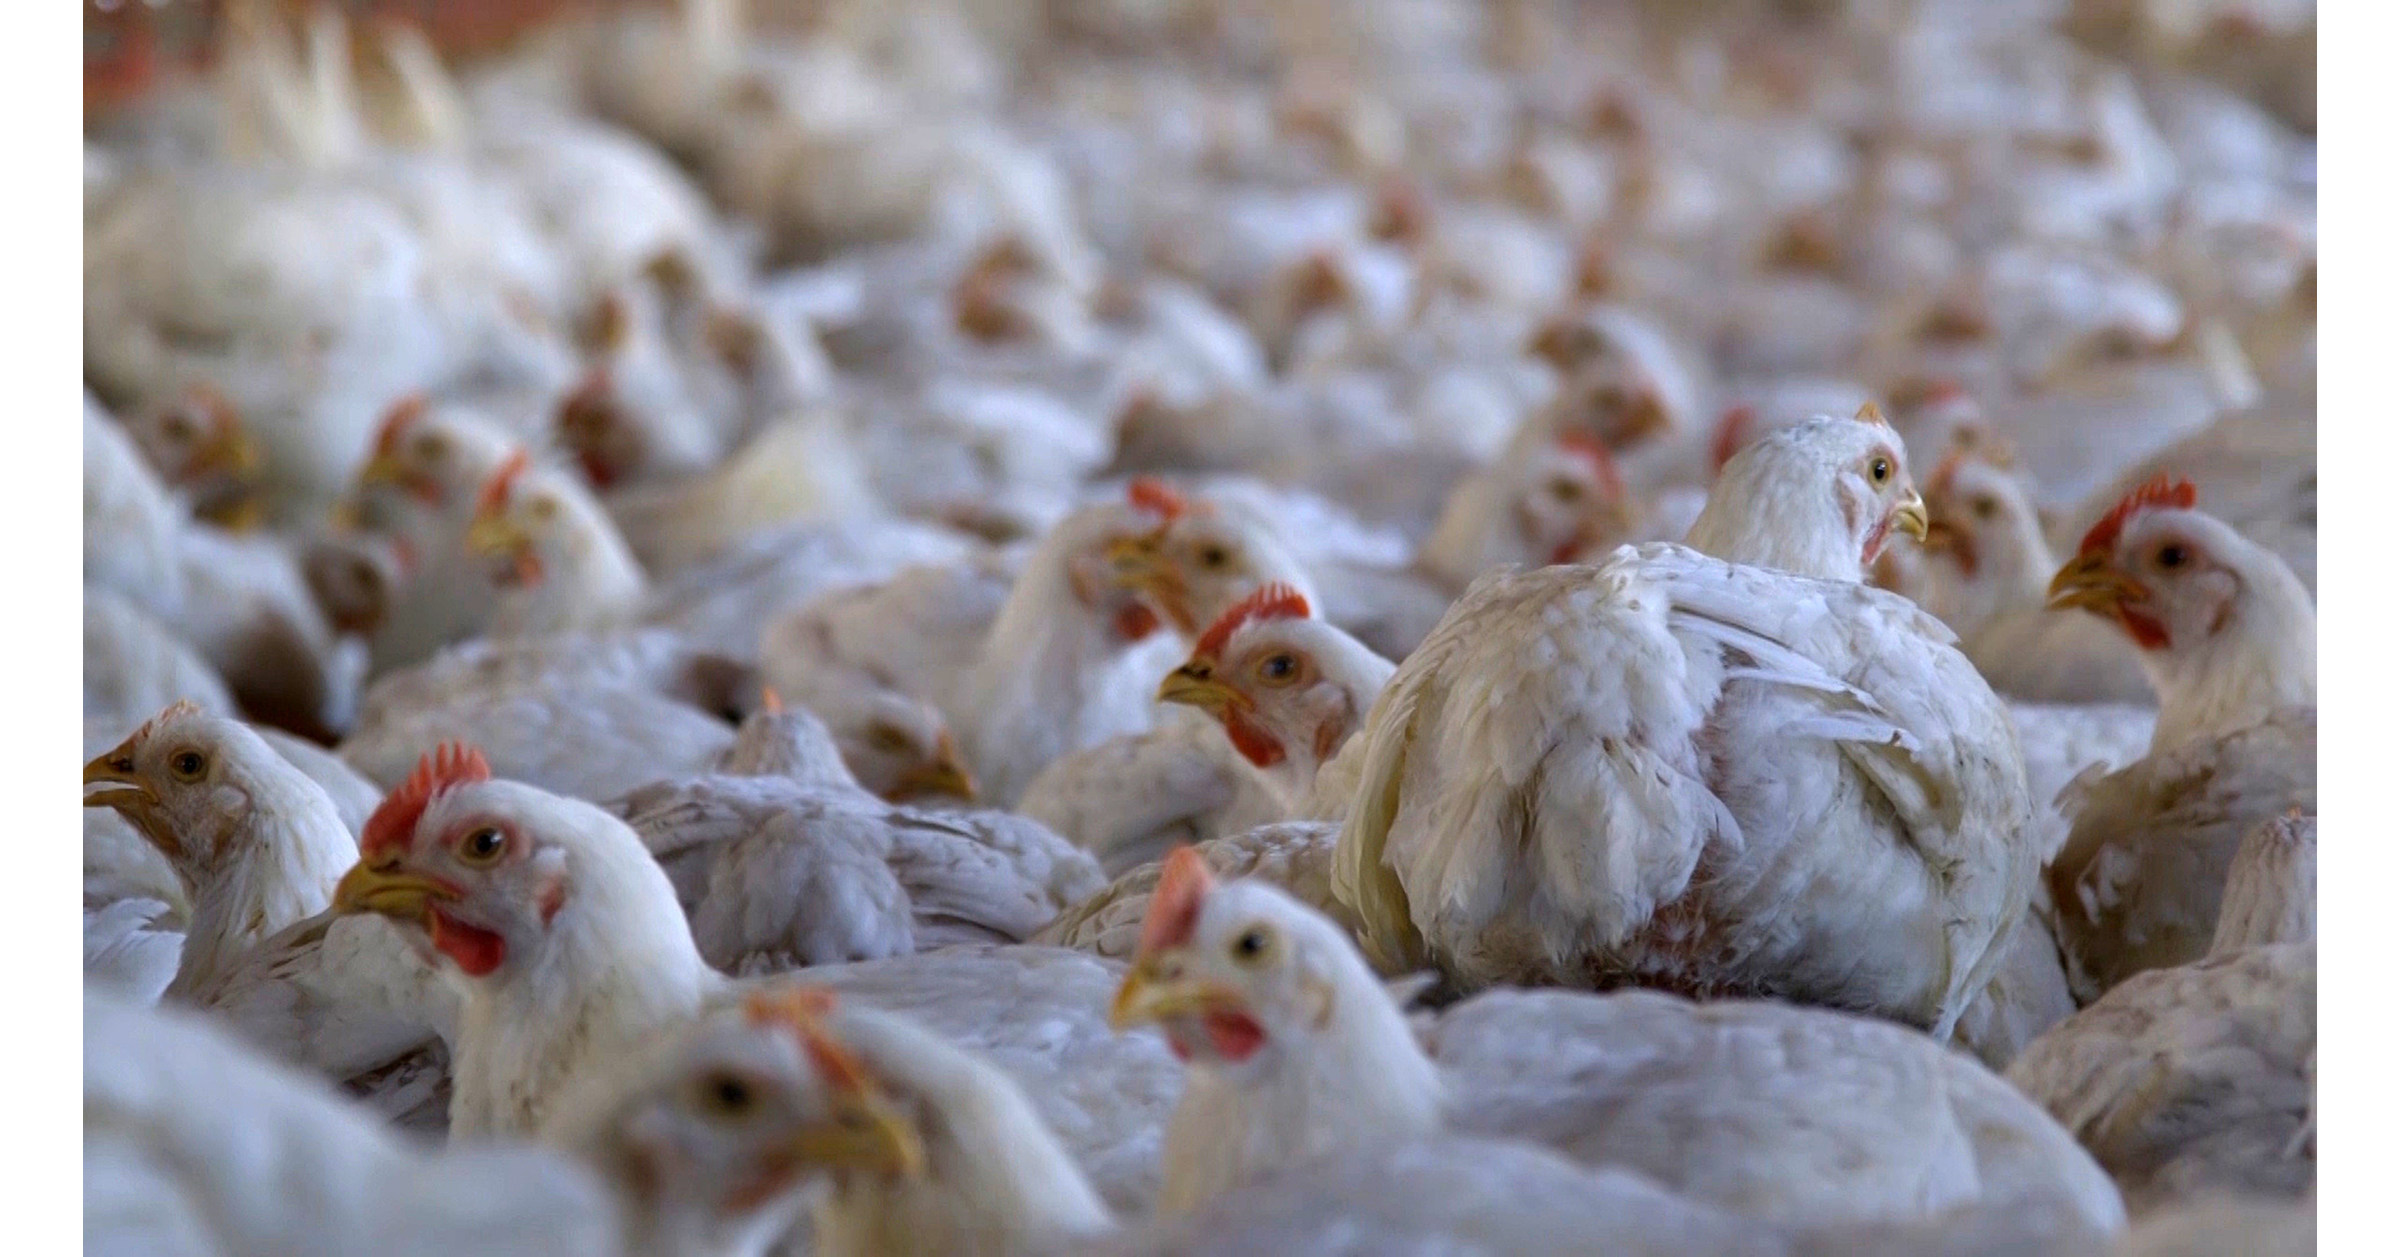 Fast Food Chains Lack Commitment on Chicken Welfare